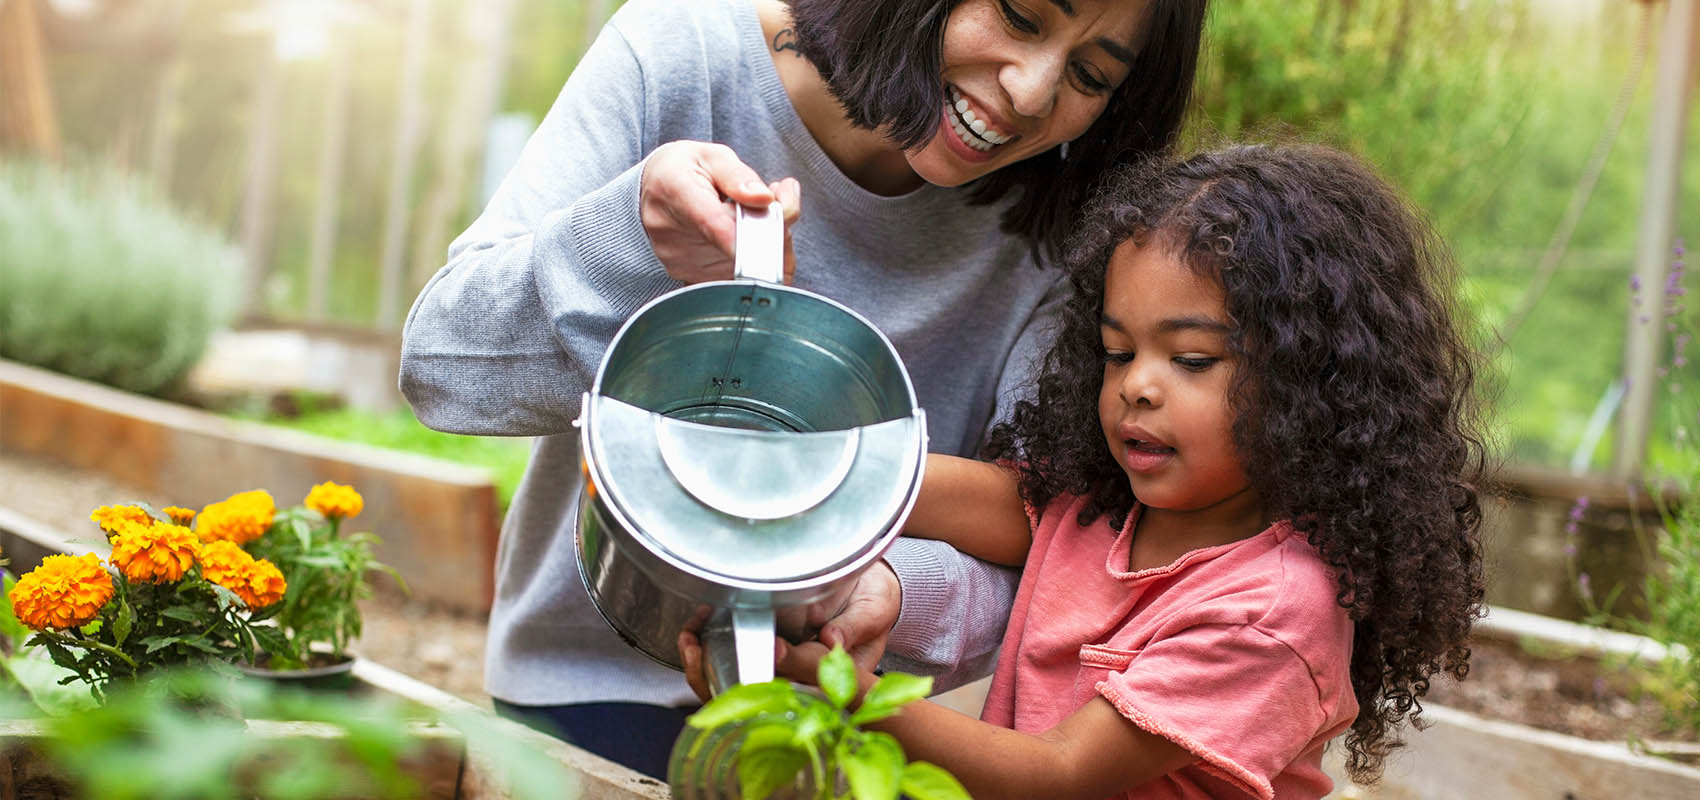 mother and daughter watering plants